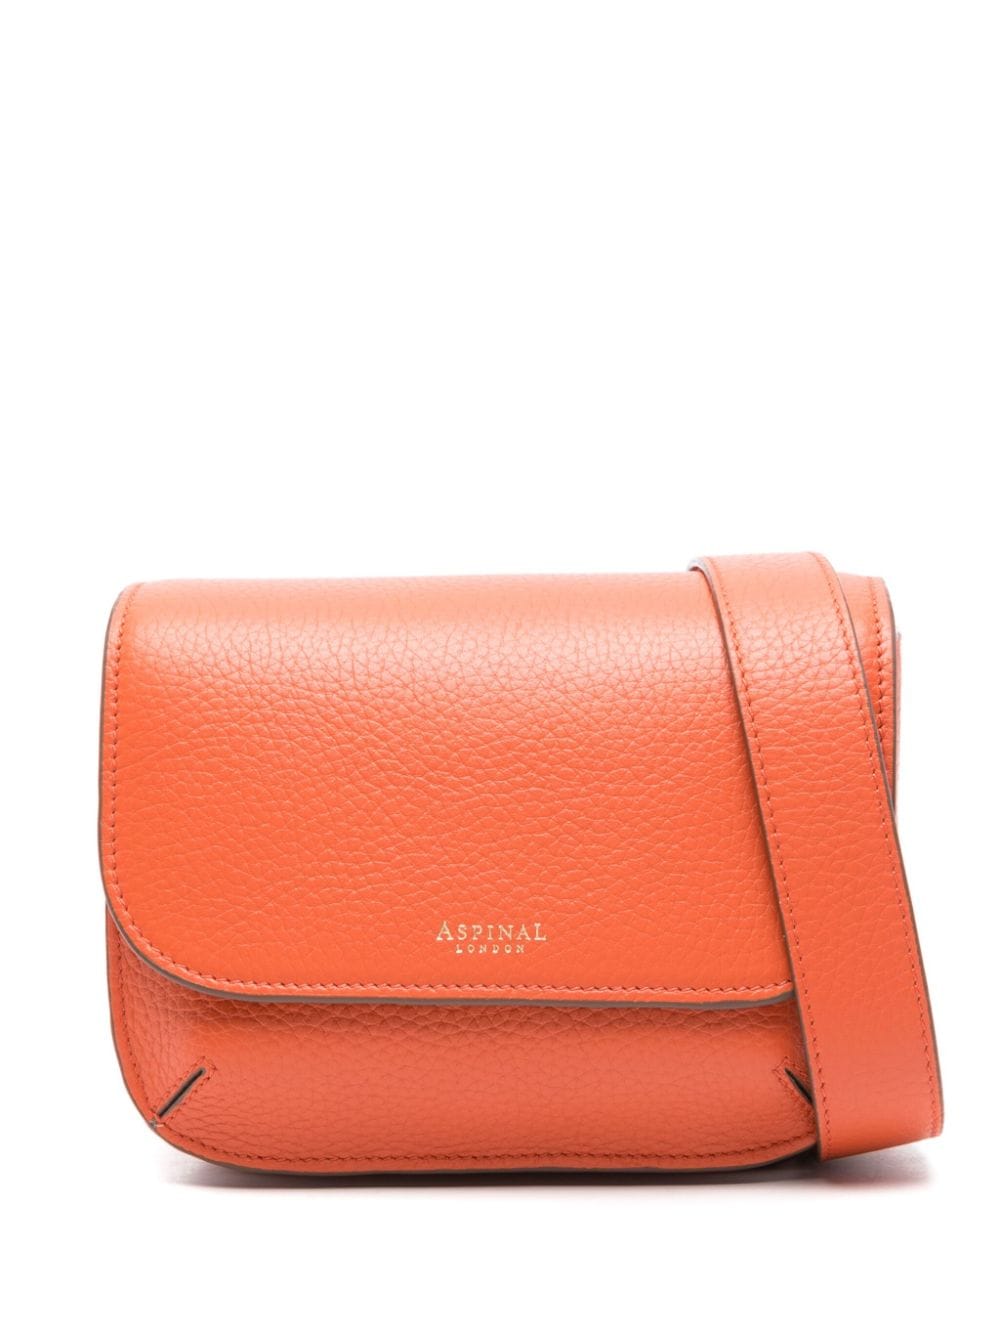 Image 1 of Aspinal Of London Ella leather cross body bag